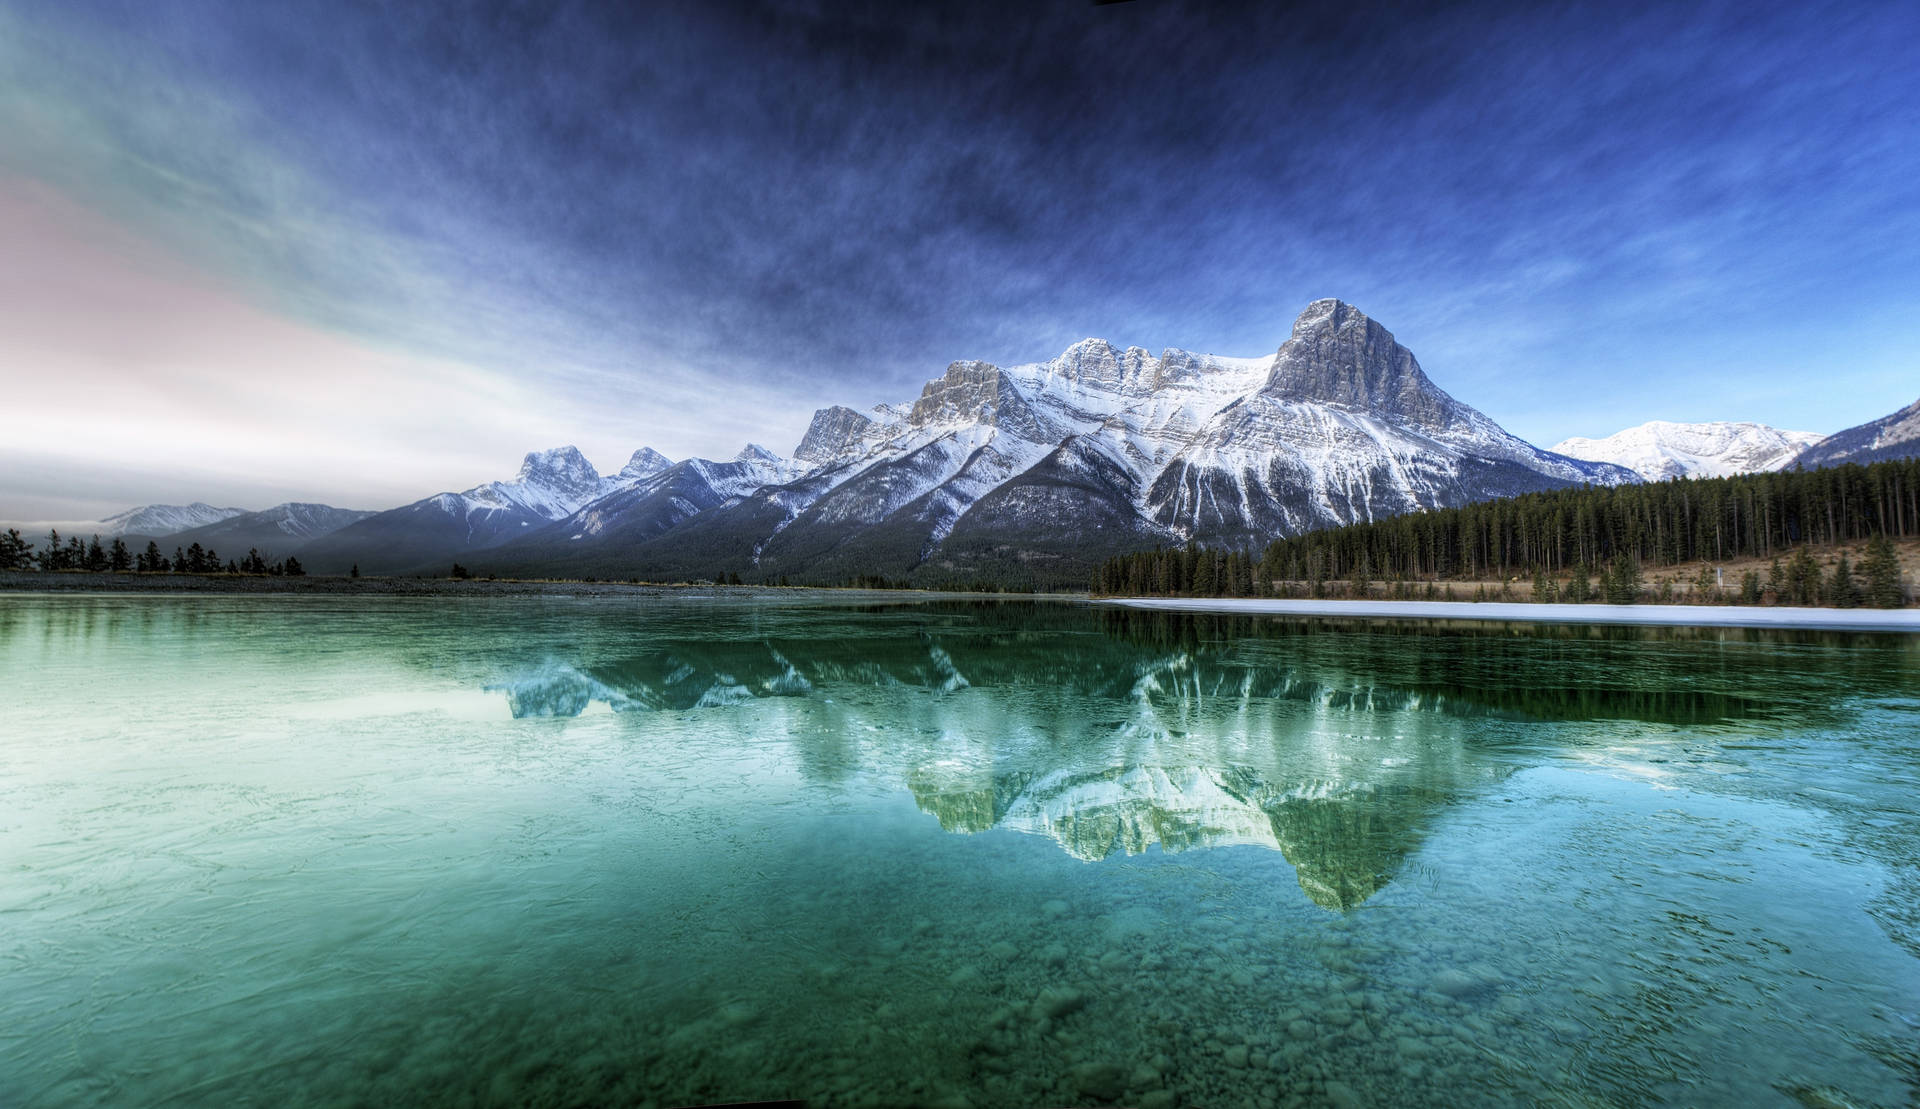 A Cool Canada Lake And Mountains Scenery Background